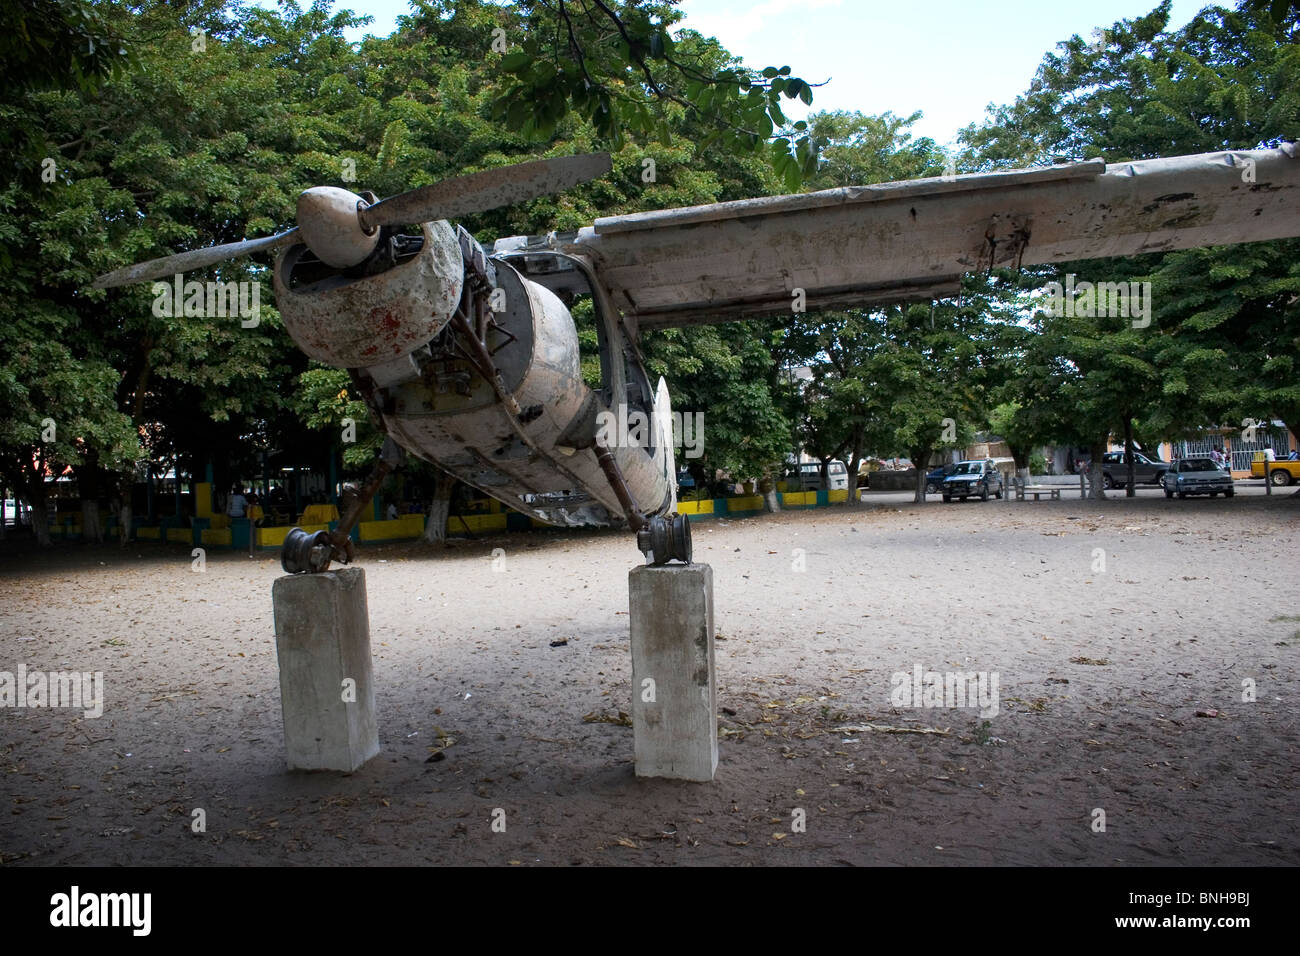 Plane wreck erected as a monument in a square, Beira, Mozambique Stock Photo